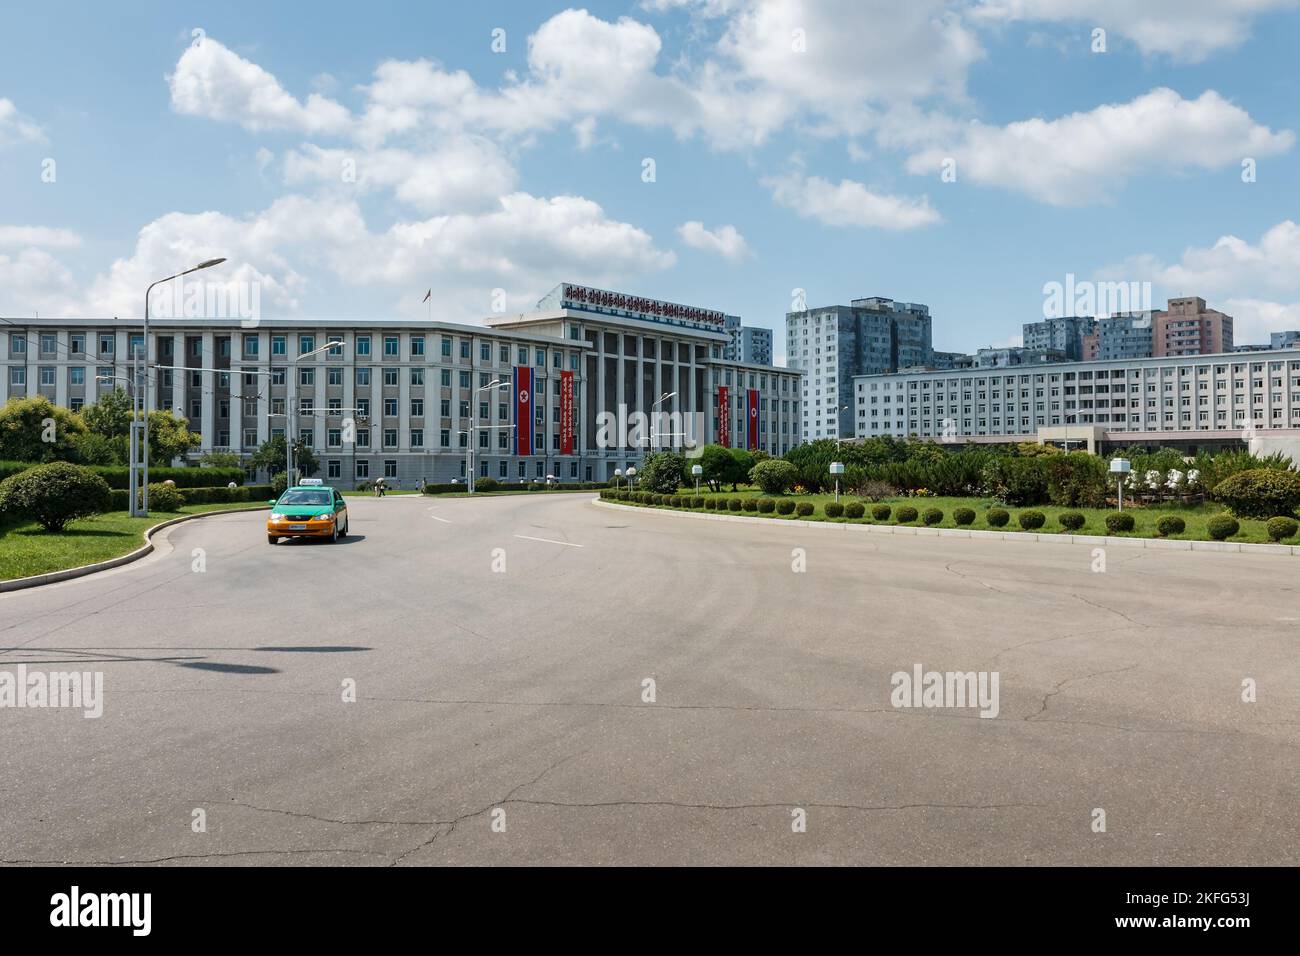 Pyongyang, North Korea - July 27, 2014: State Planning Commission near the Arch of Triumph in Pyongyang. Moranbong Street Stock Photo